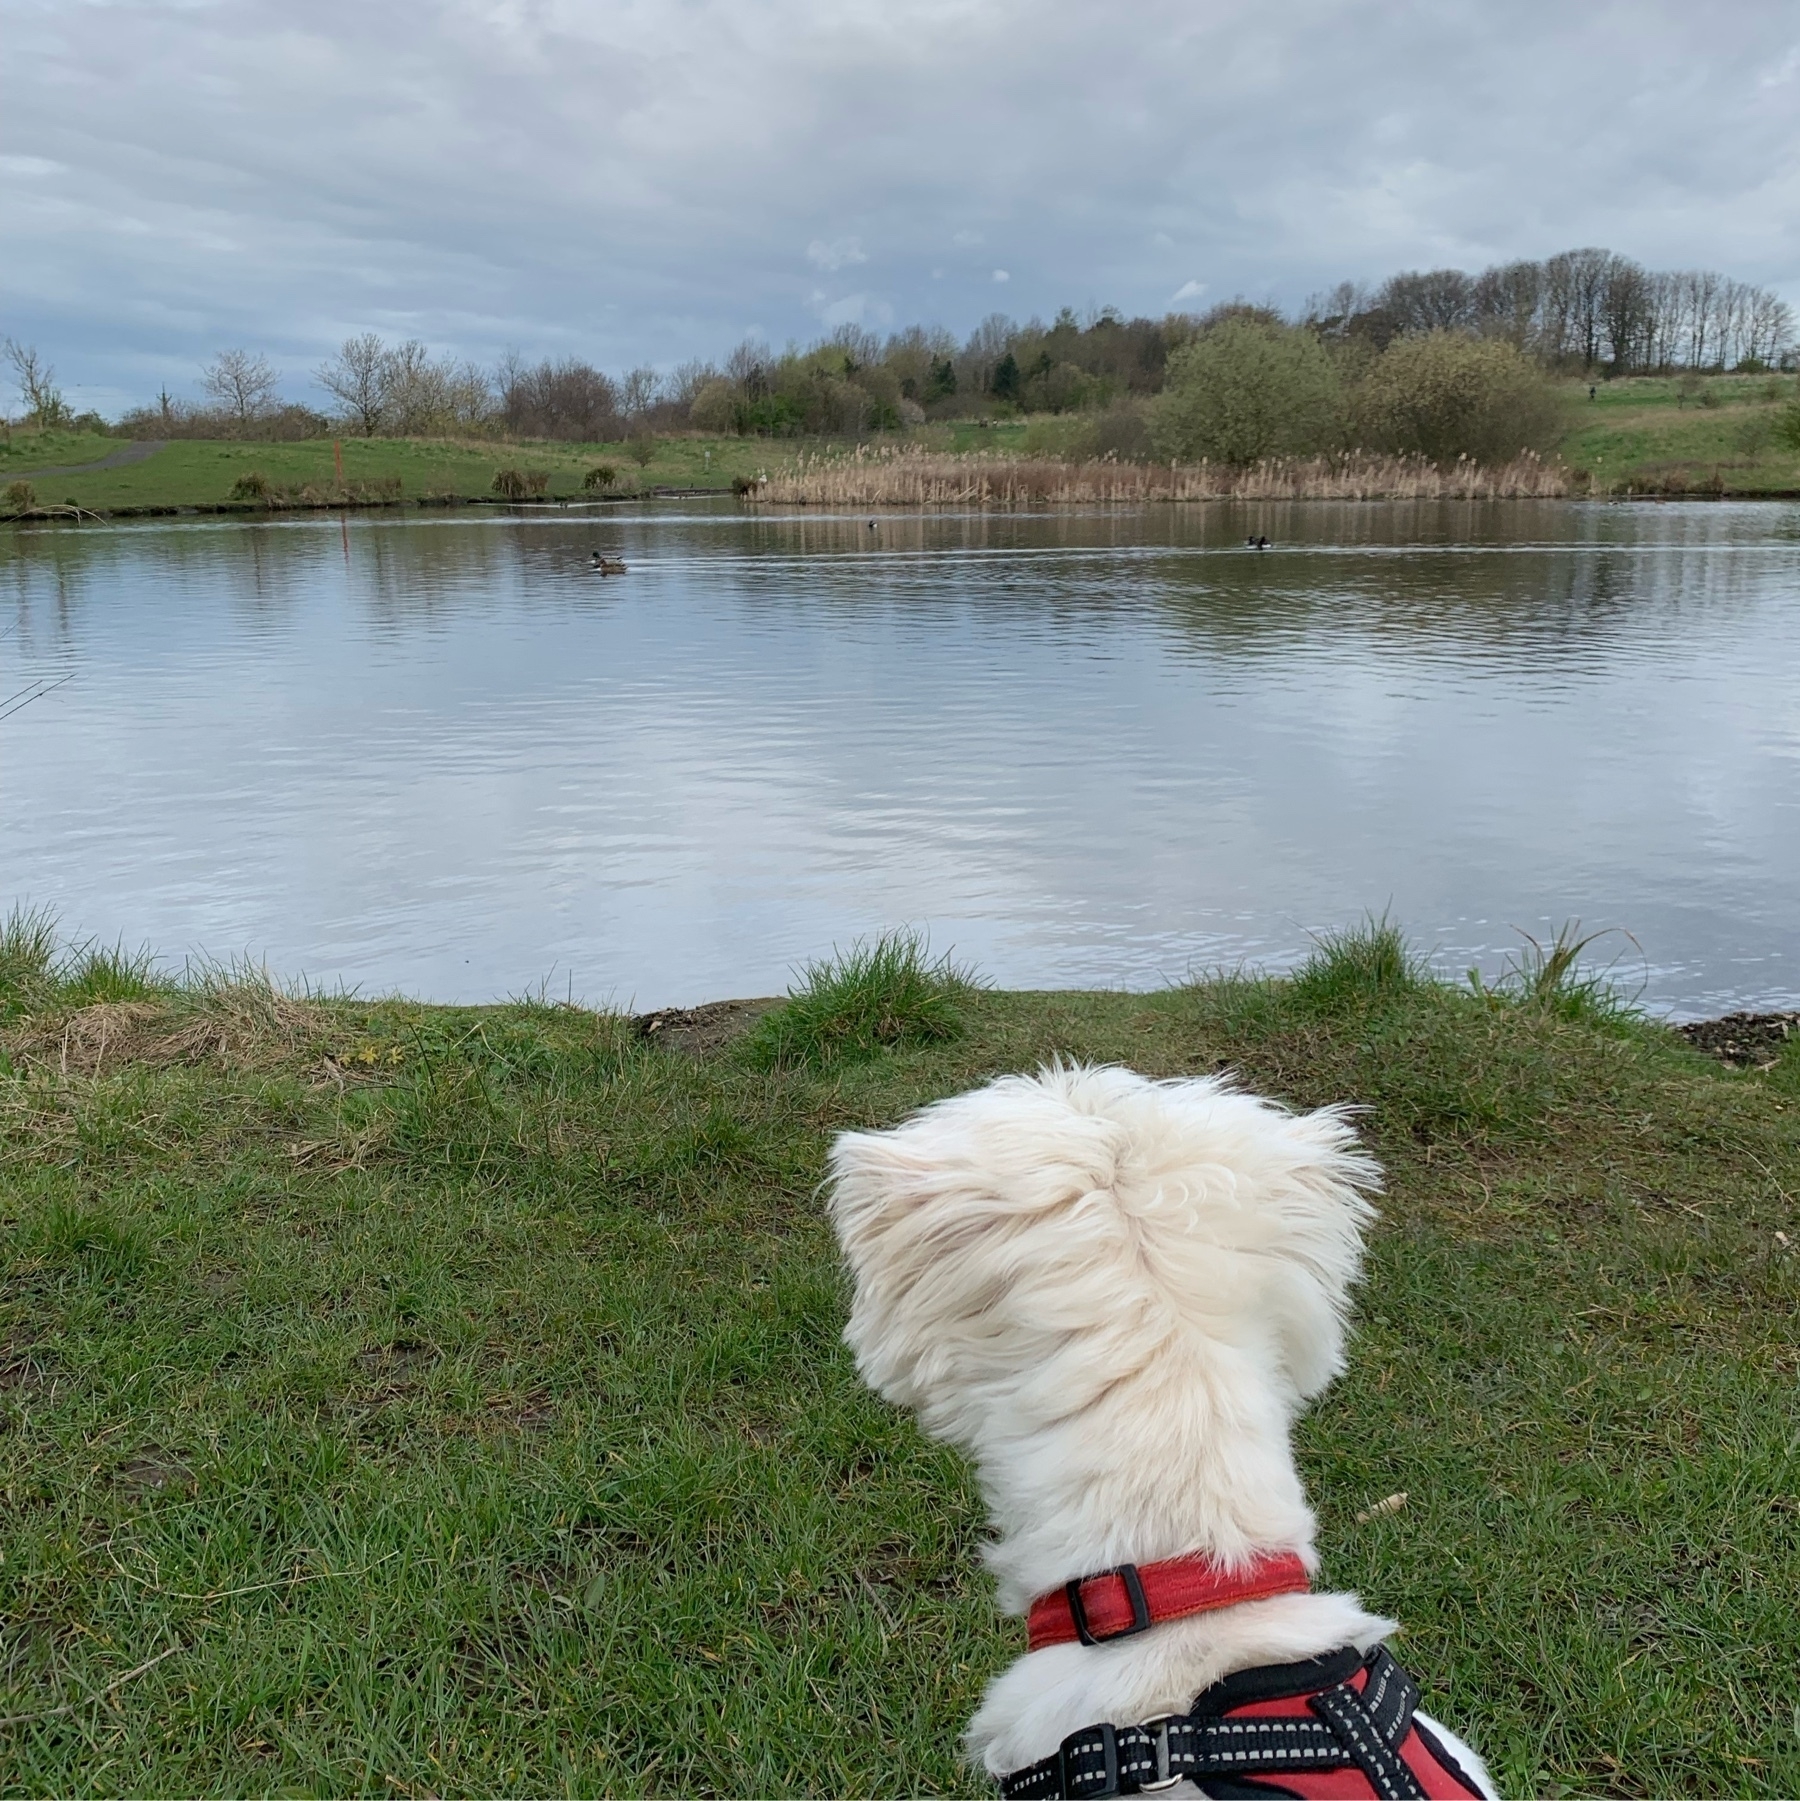 Small white dog looks out across a large pond towards woodland beyond